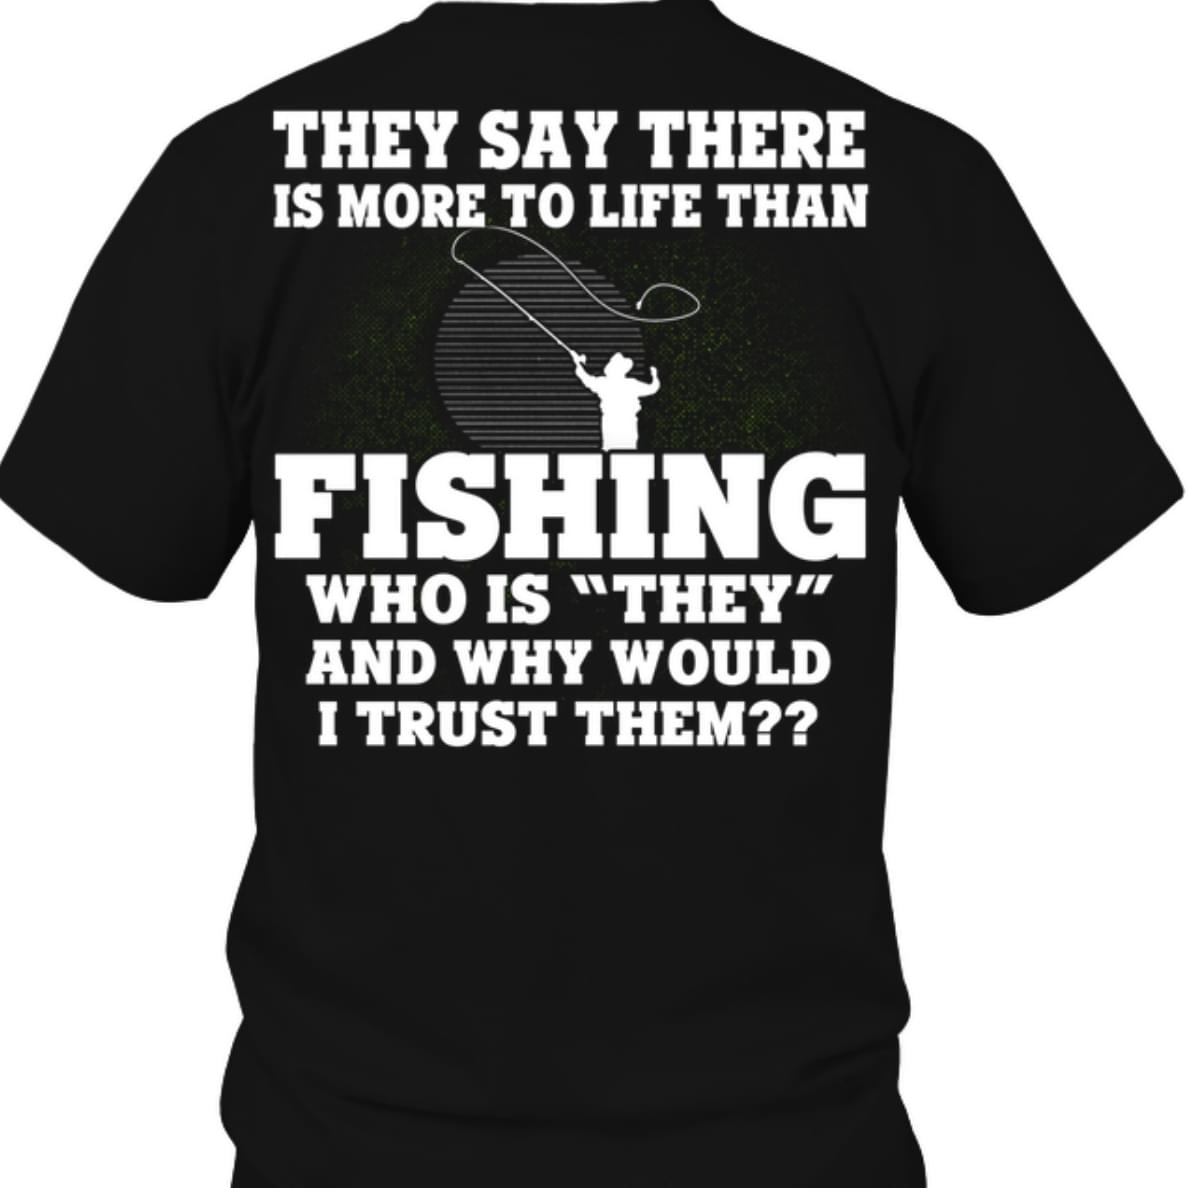 They Say There Is More To Life Than Fishing Who Is They And Why Would I trust Them